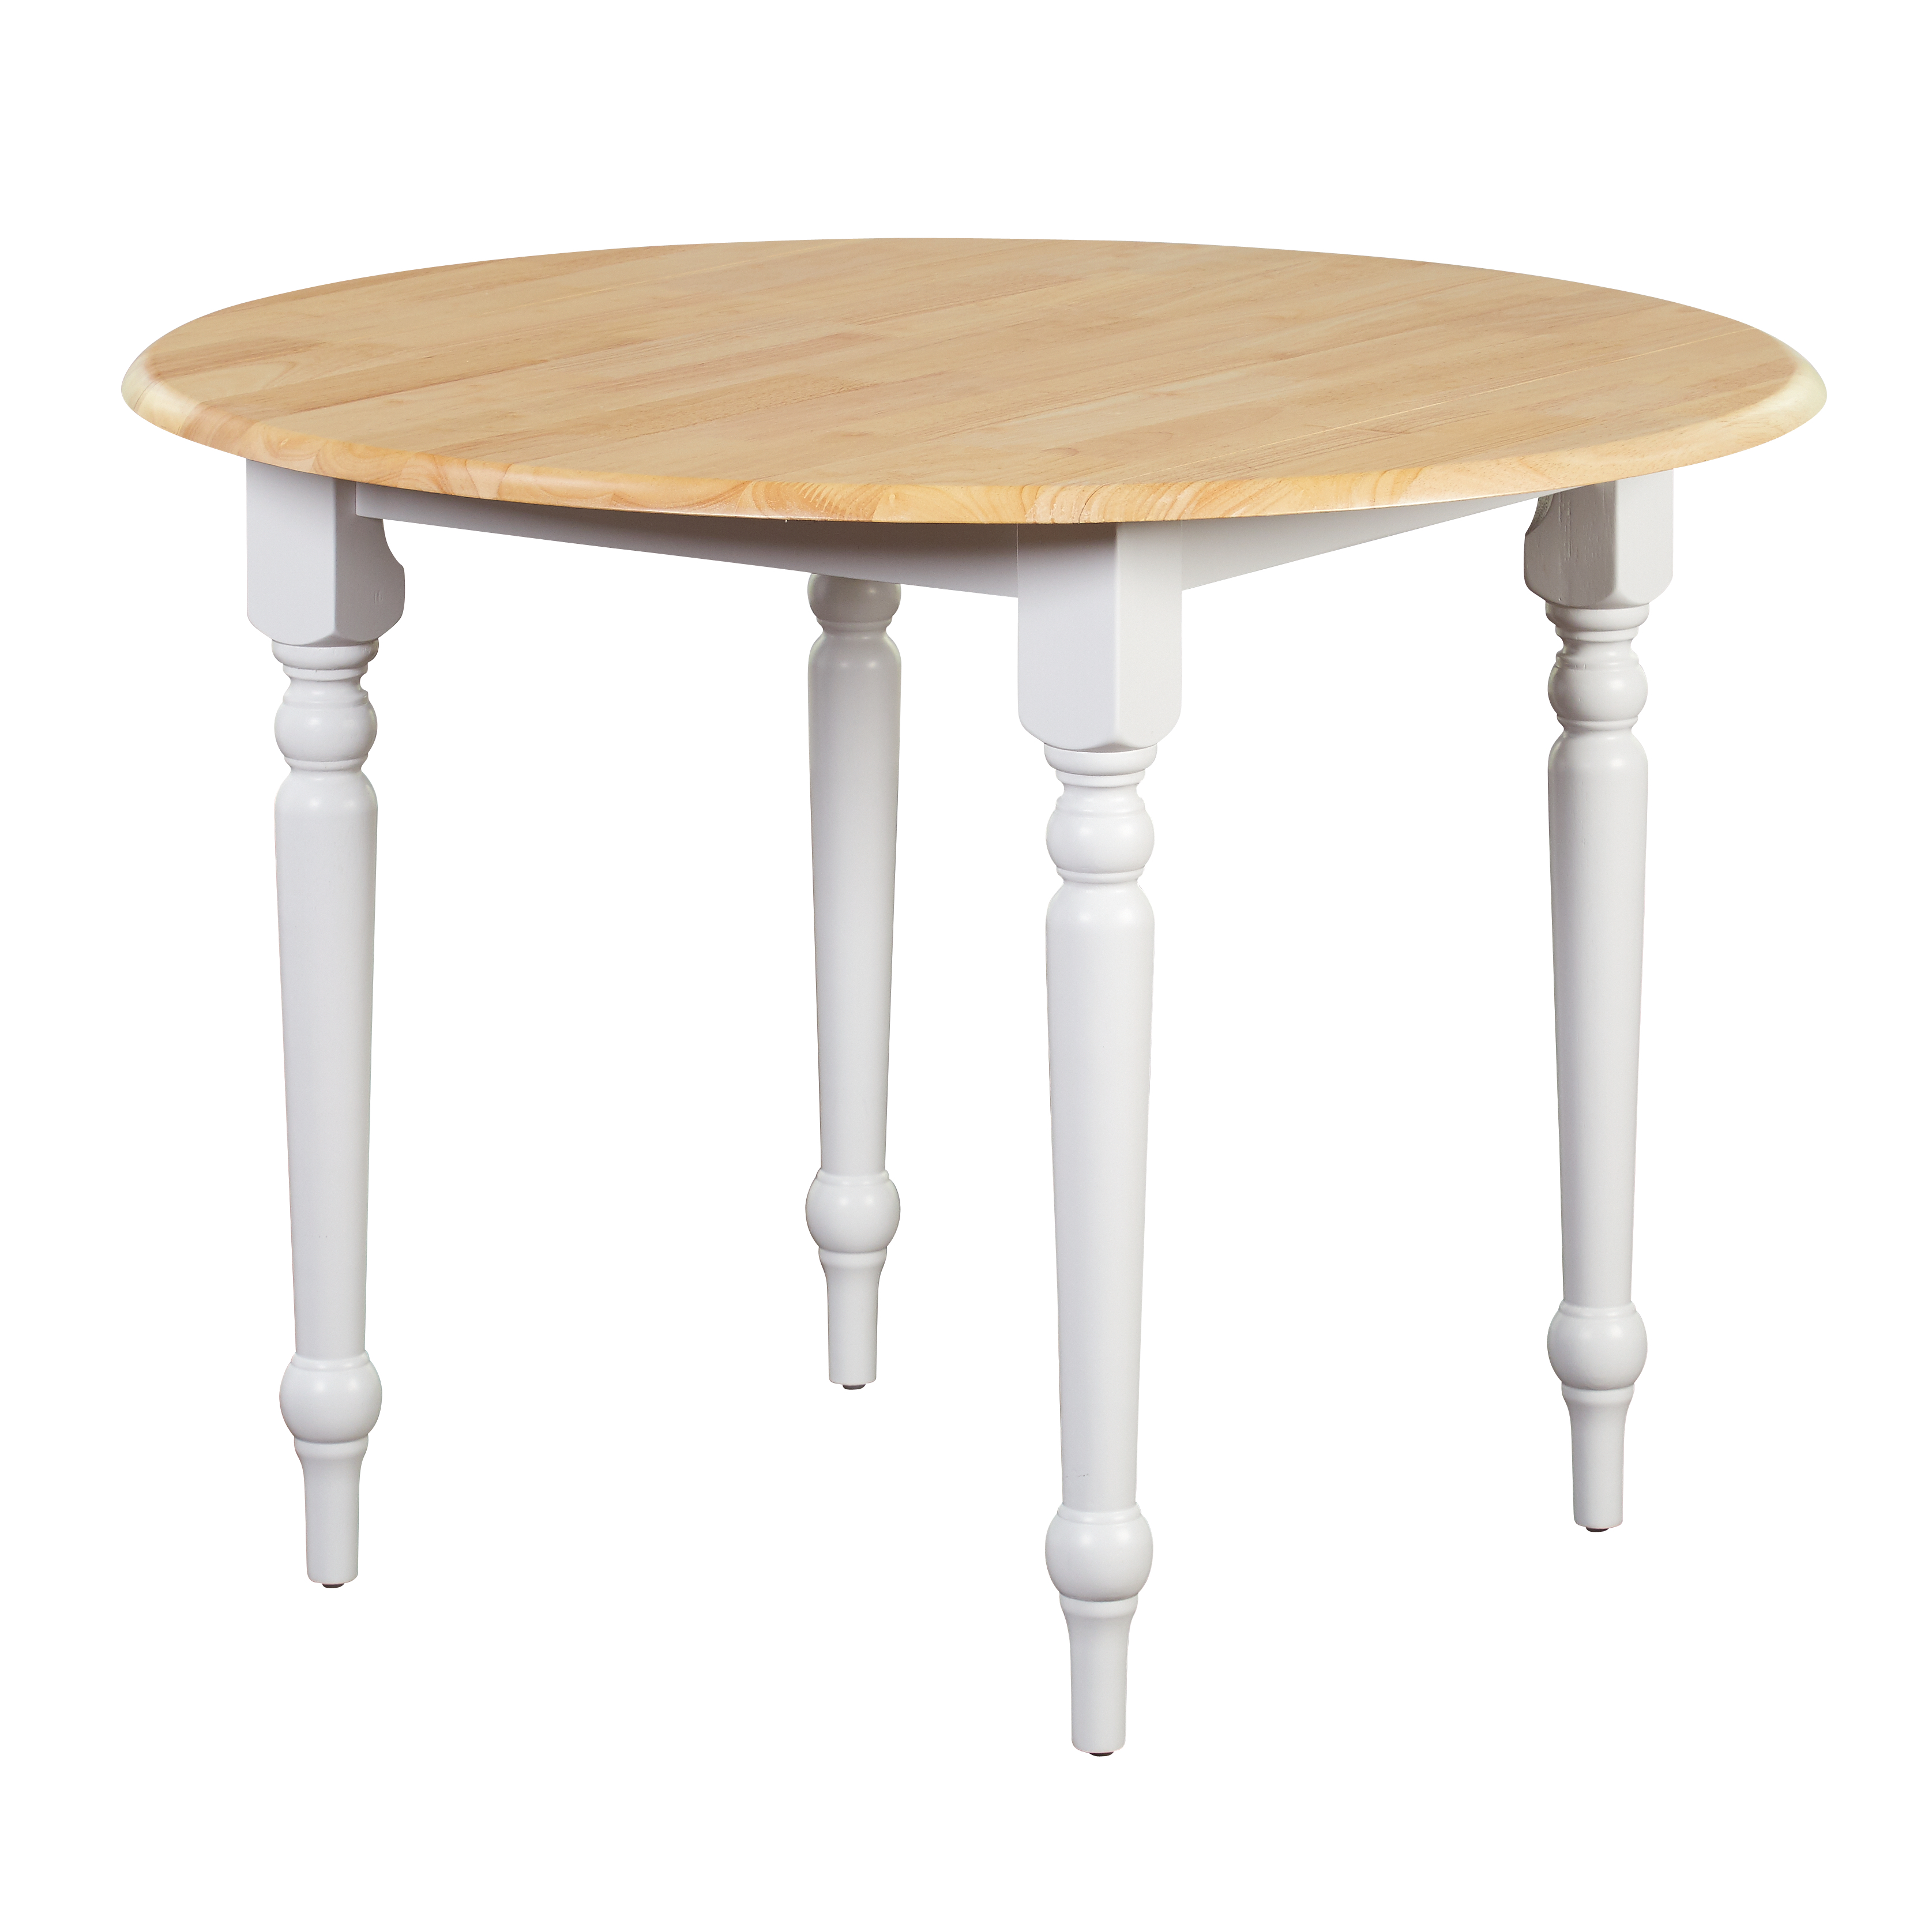 TMS Round Drop-Leaf Dining Table, White/Natural - image 5 of 5